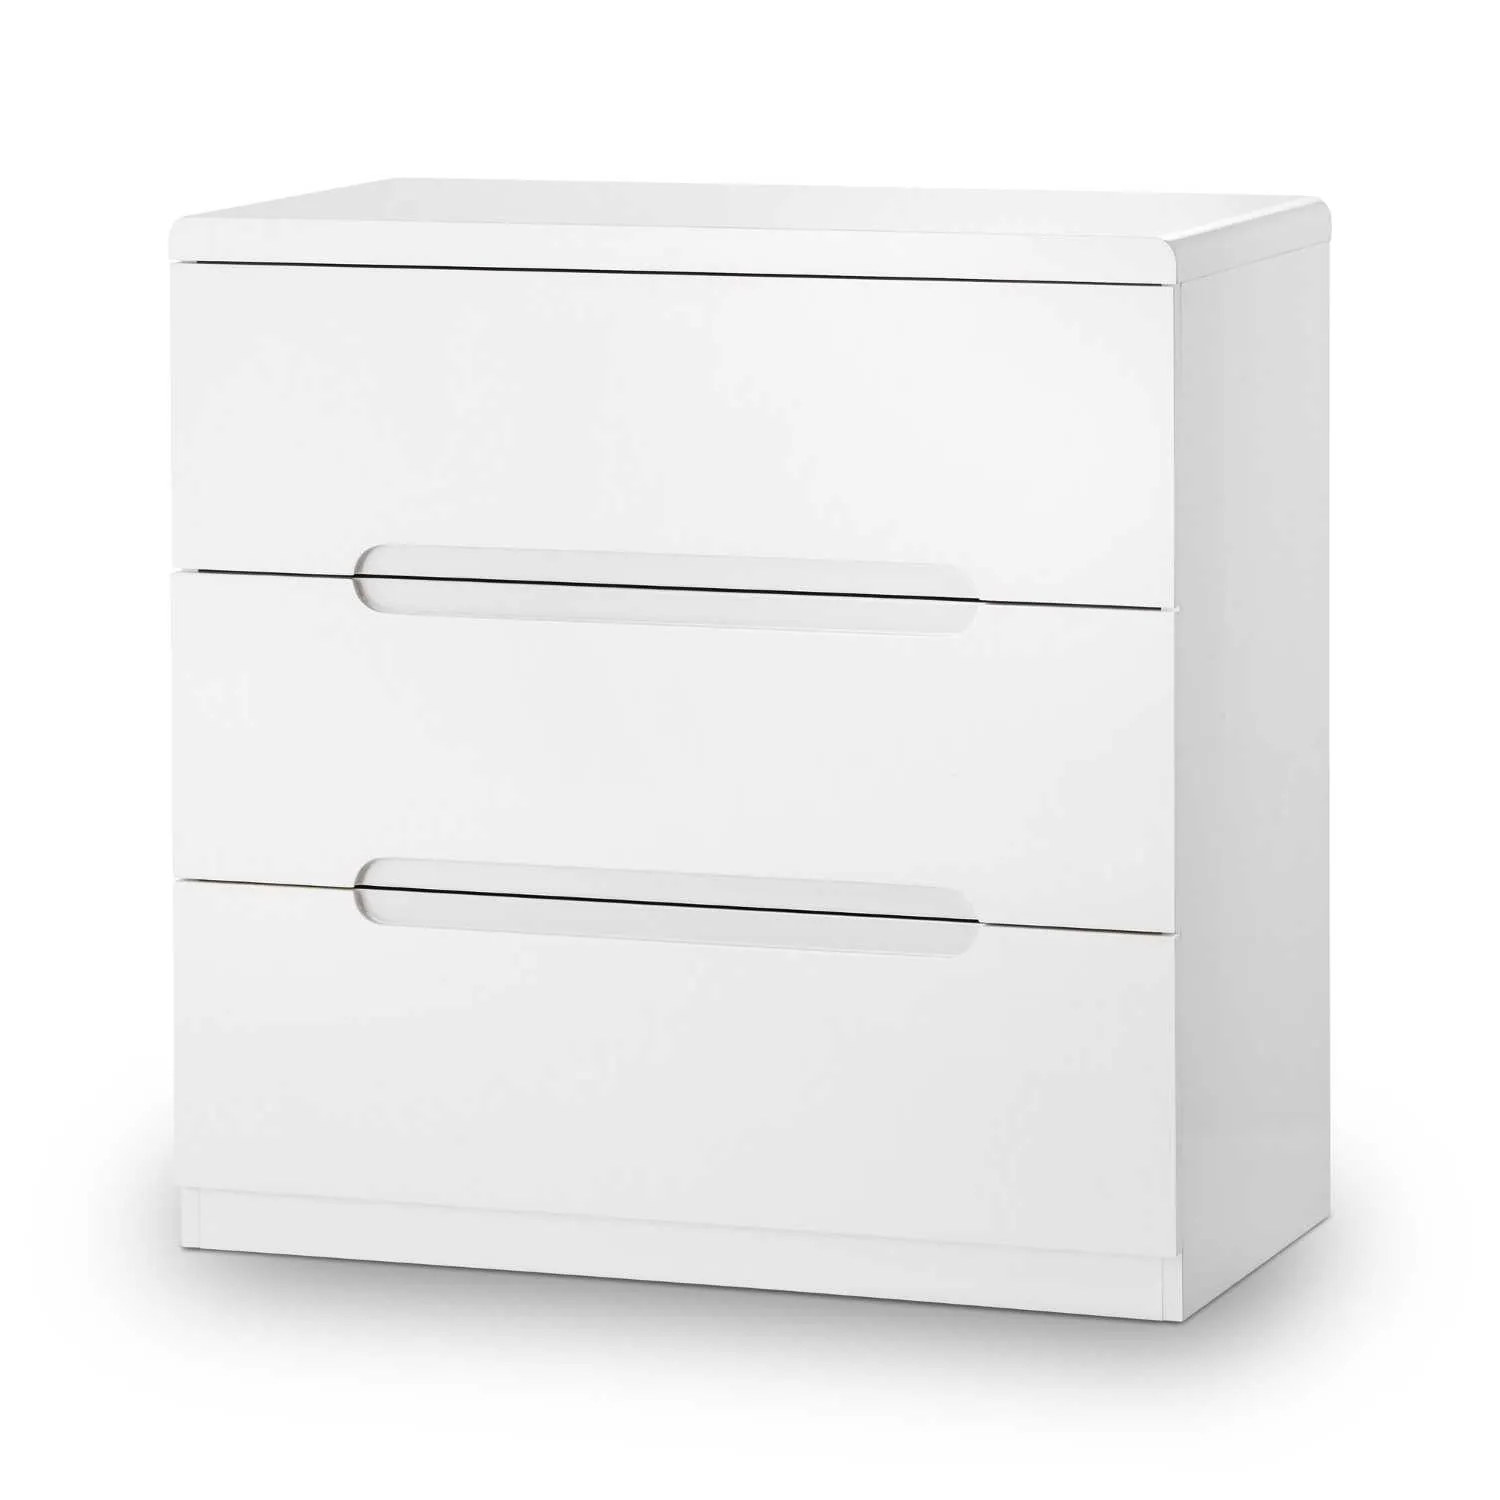 Modern White High Gloss Lacquered Chest of 3 Drawers with Recessed Handles